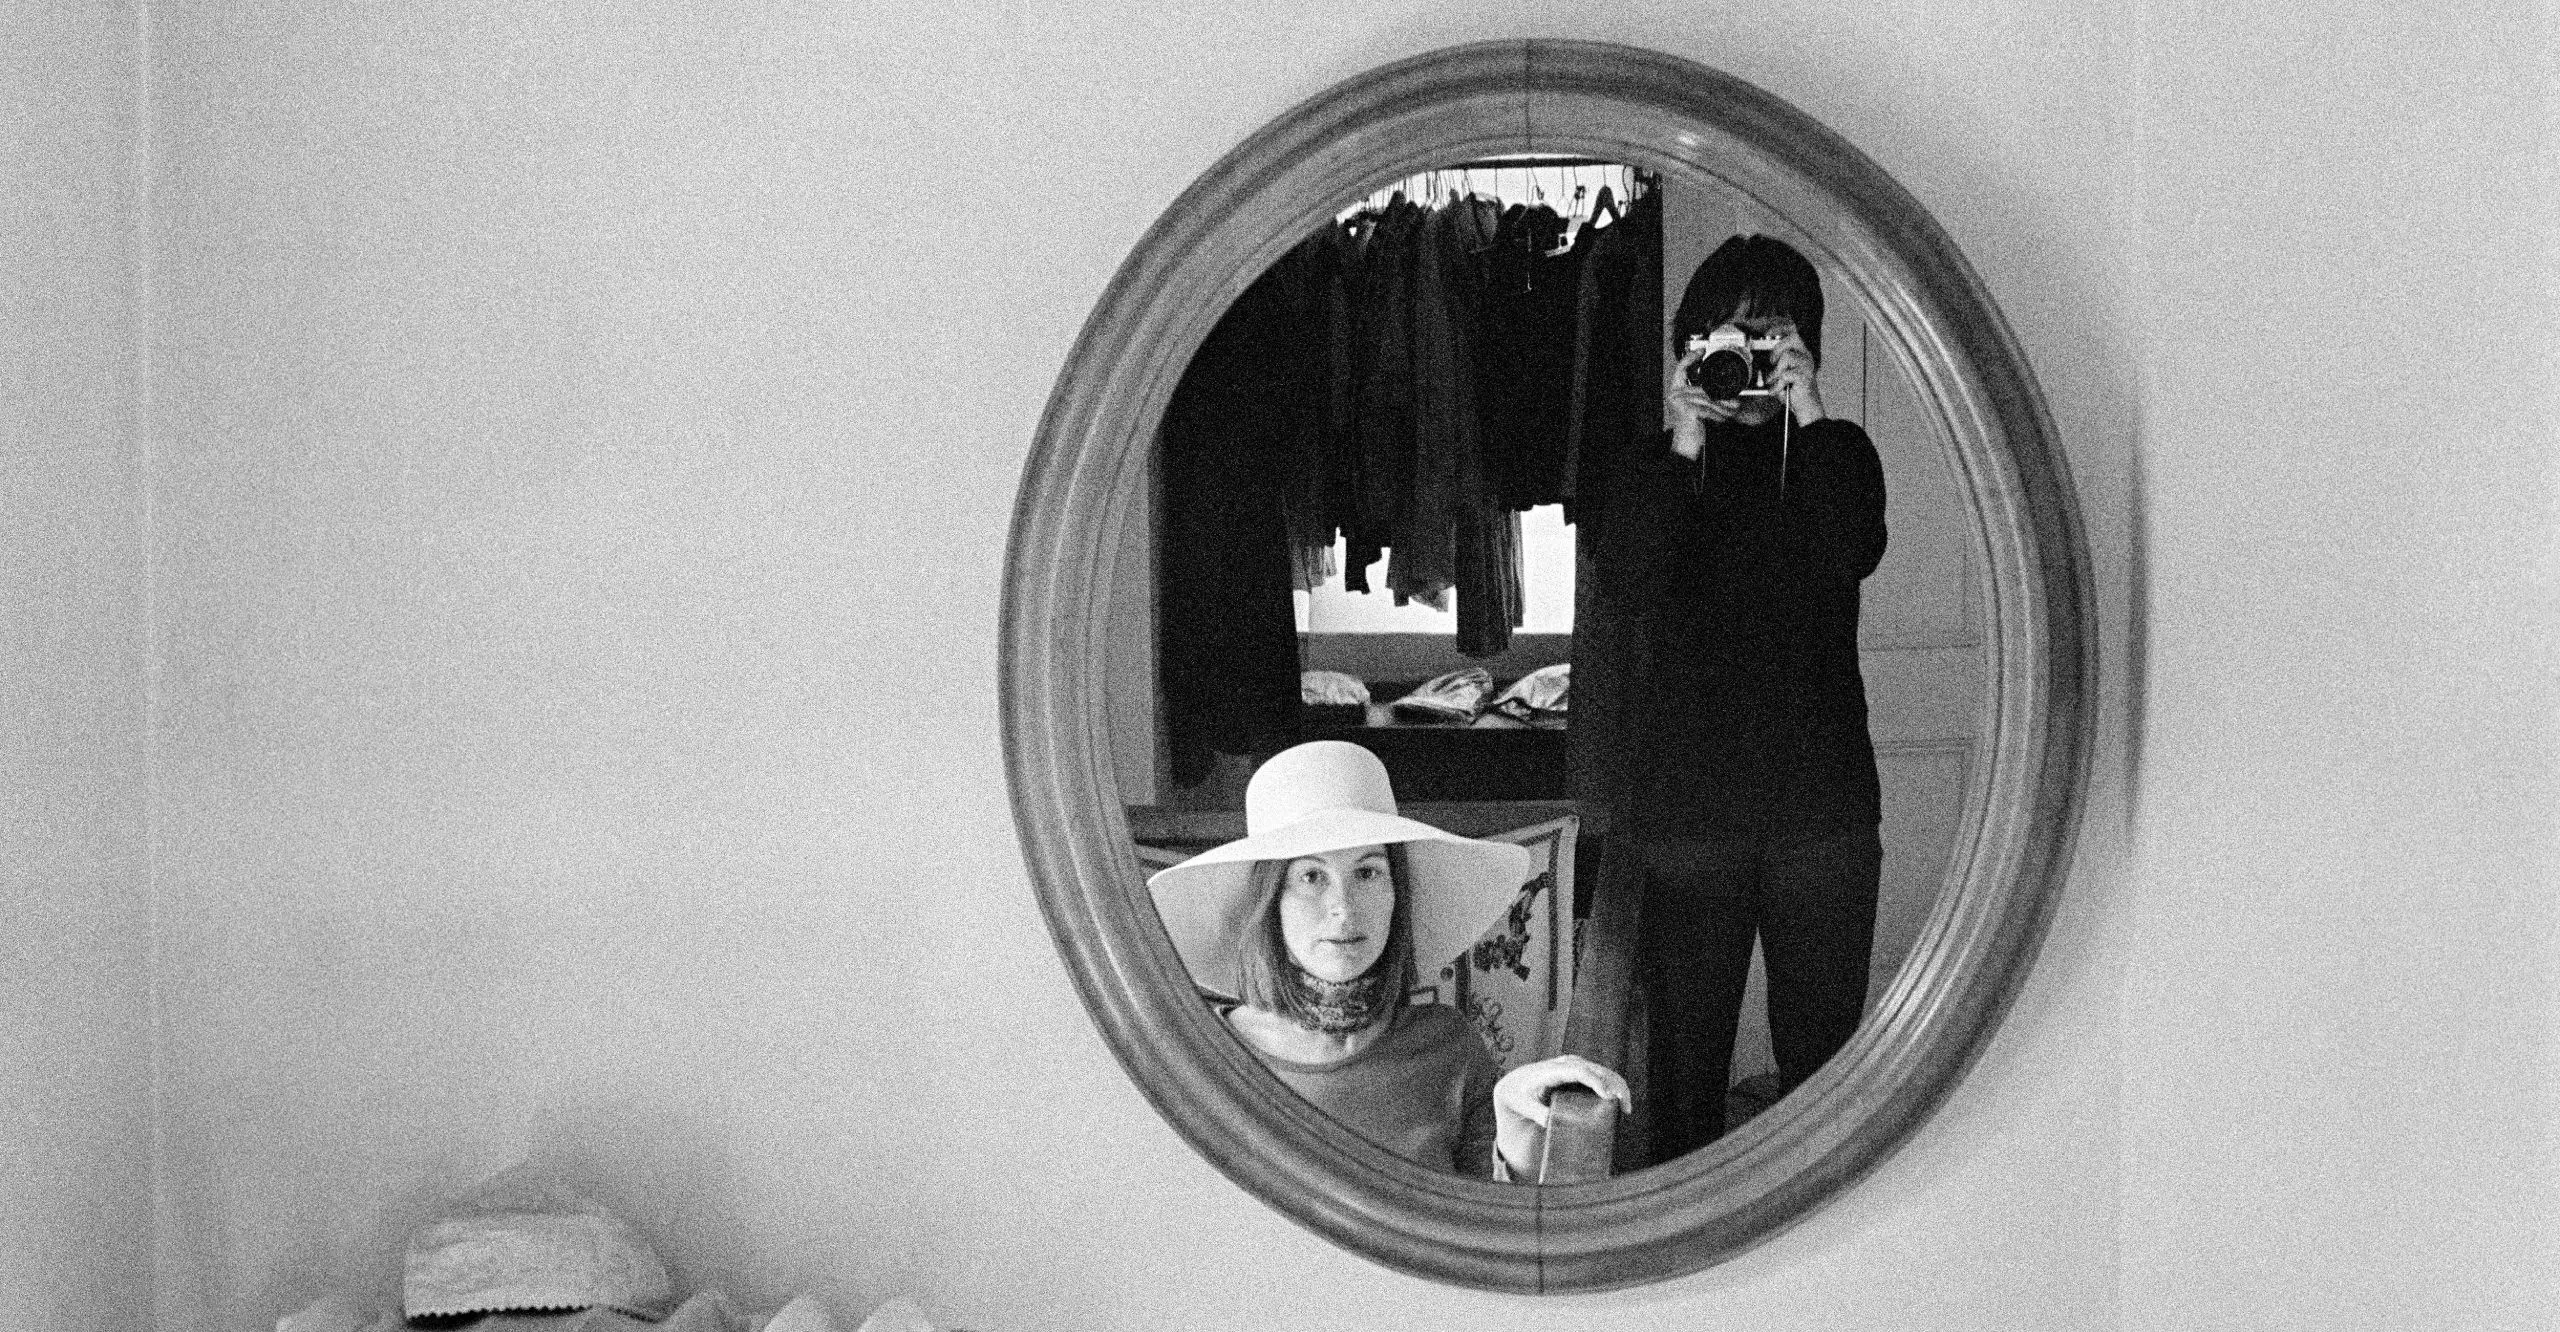 Black and white photograph showing a mirror on a plain wall. Reflected in the mirror is a woman wearing a wide brimmed hat and stood next to her, a woman holding up a camera to take the photo, wearing a black top and trousers